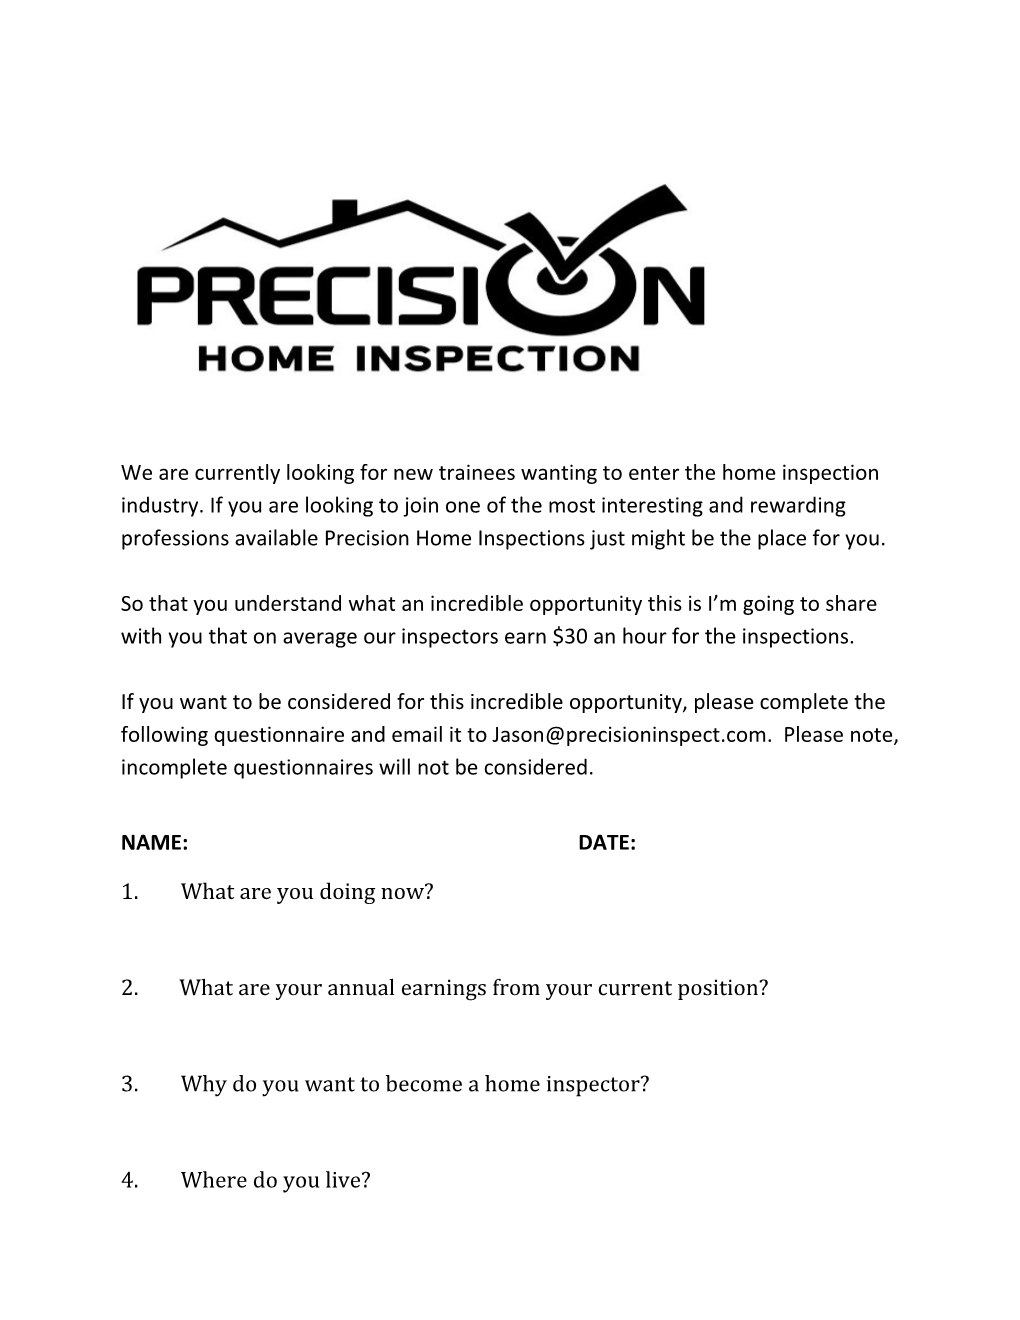 We Are Currently Looking for New Trainees Wanting to Enter the Home Inspection Industry s1